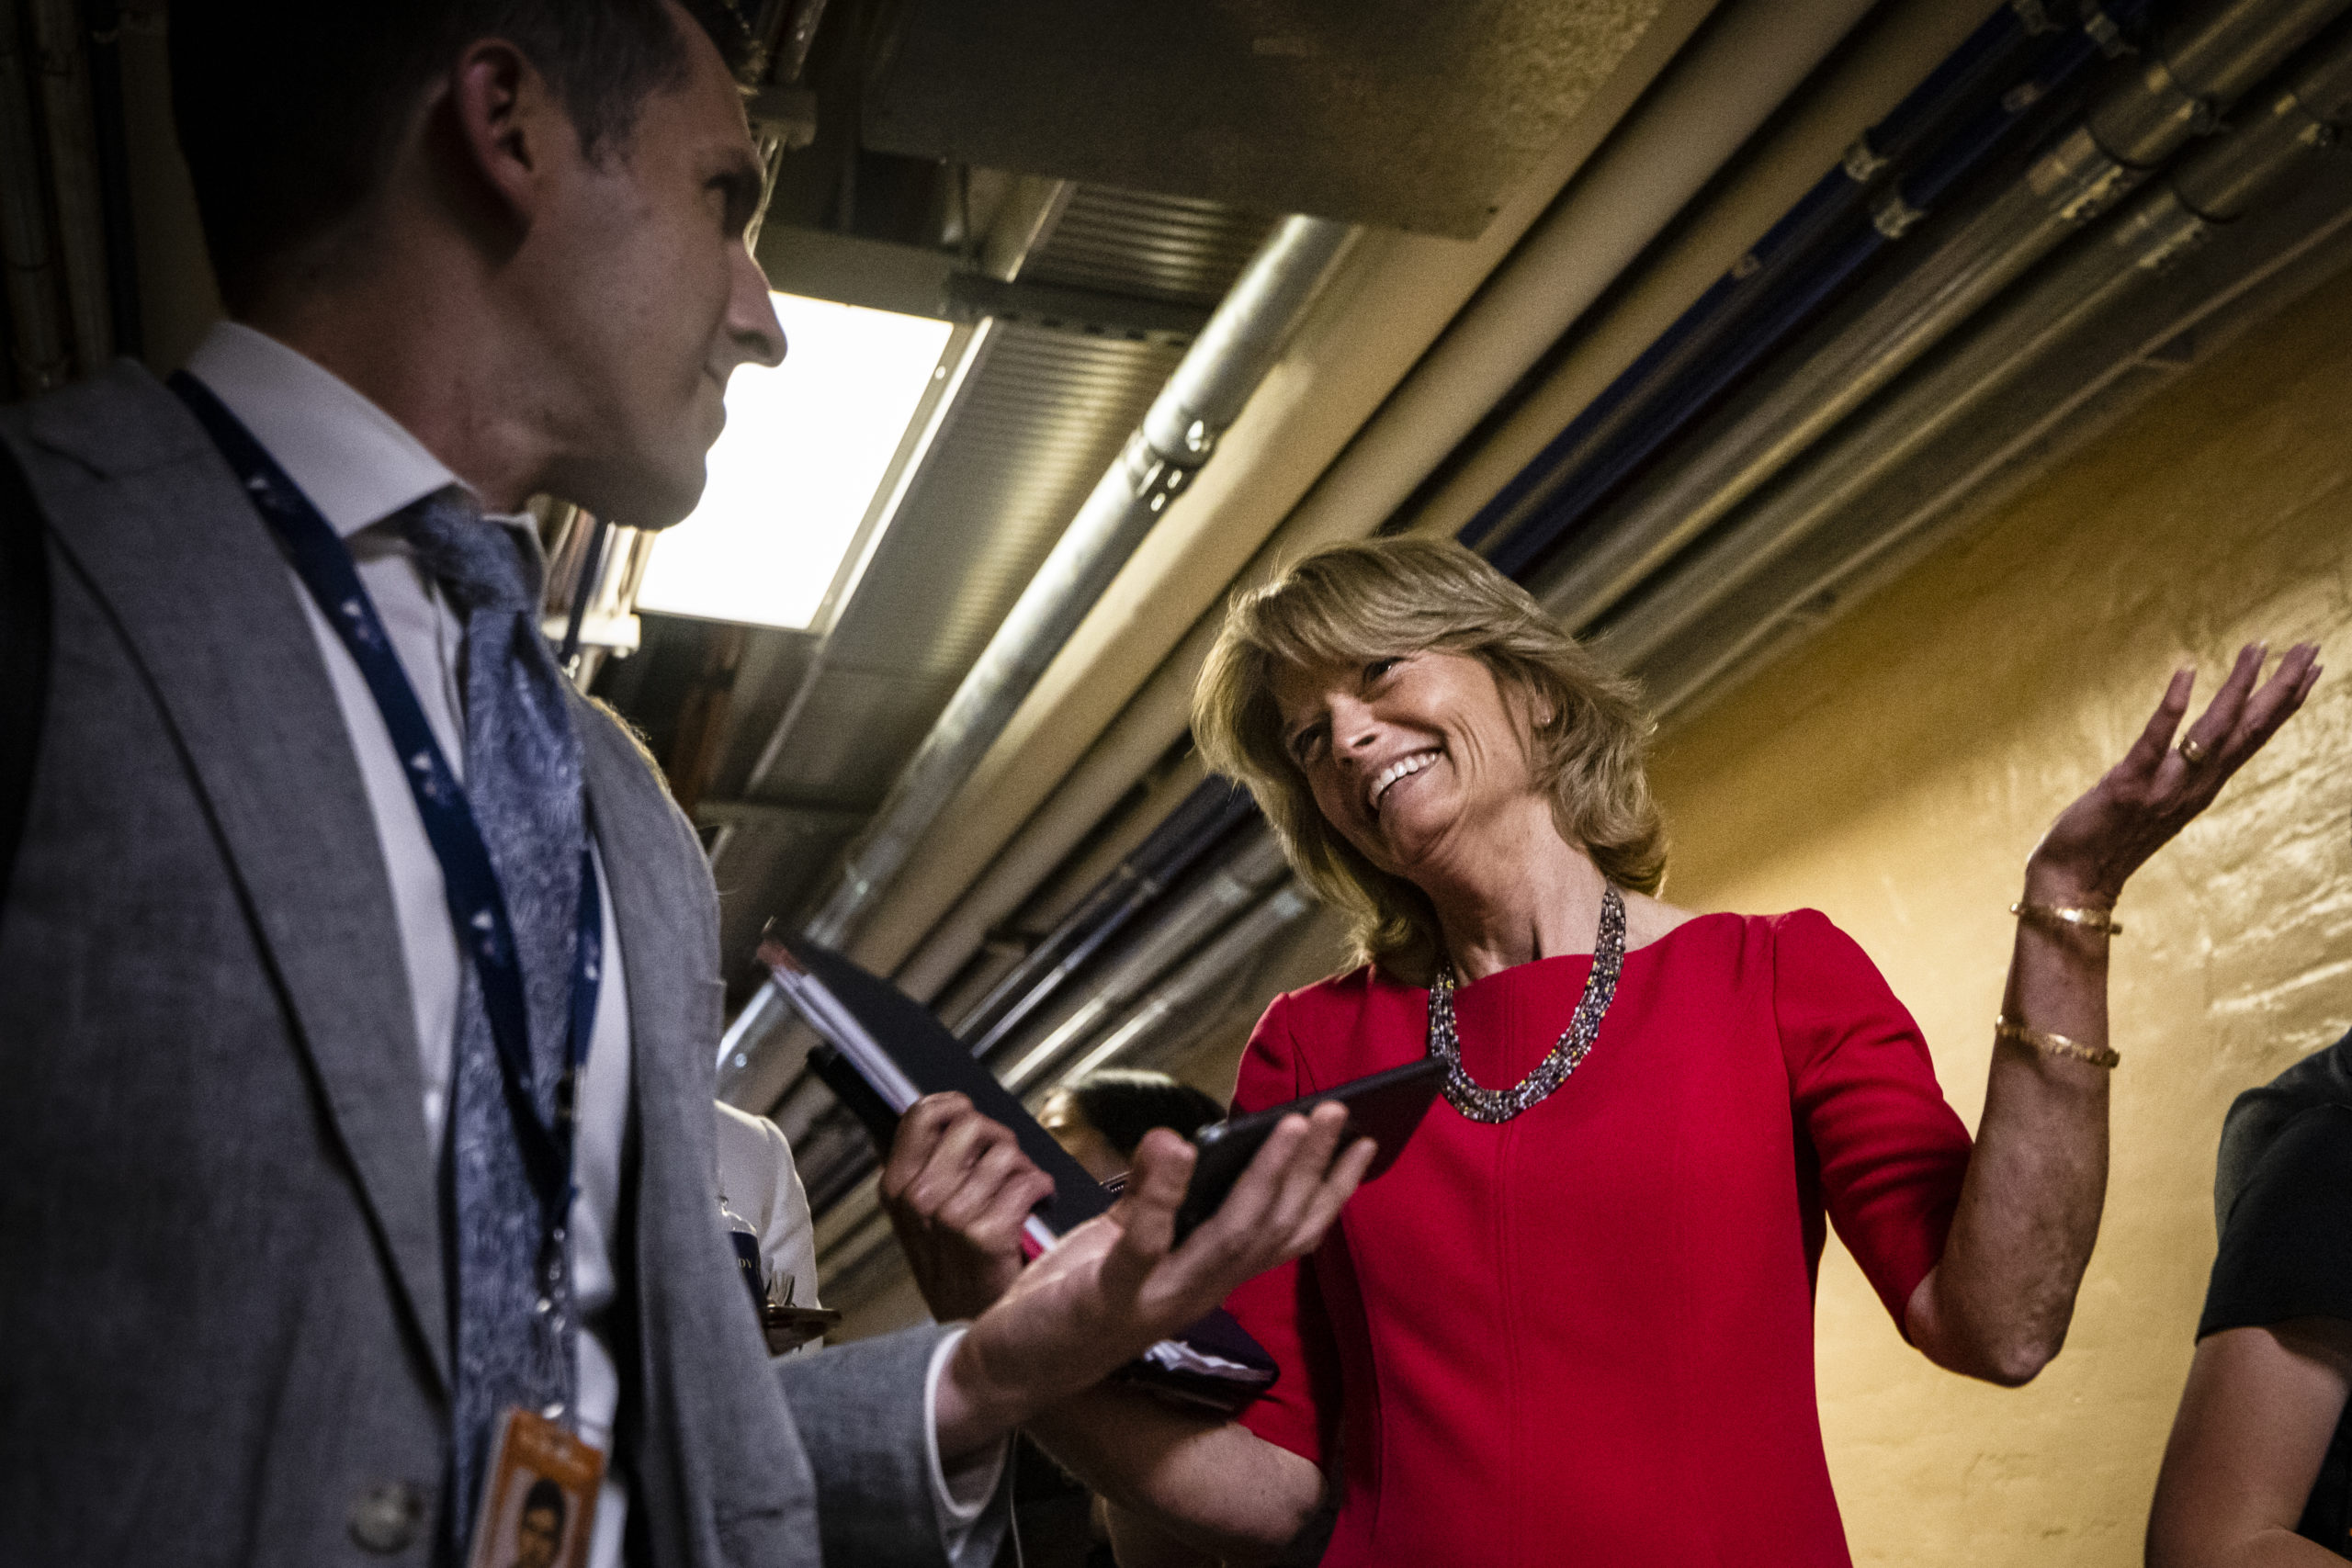 U.S. Sen. Lisa Murkowski (R-AK) reacts to questions from reporters as she leaves a bipartisan meeting on infrastructure in the basement of the U.S. Capitol building after the original talks fell through with the White House on June 8, 2021 in Washington, DC. (Samuel Corum/Getty Images)